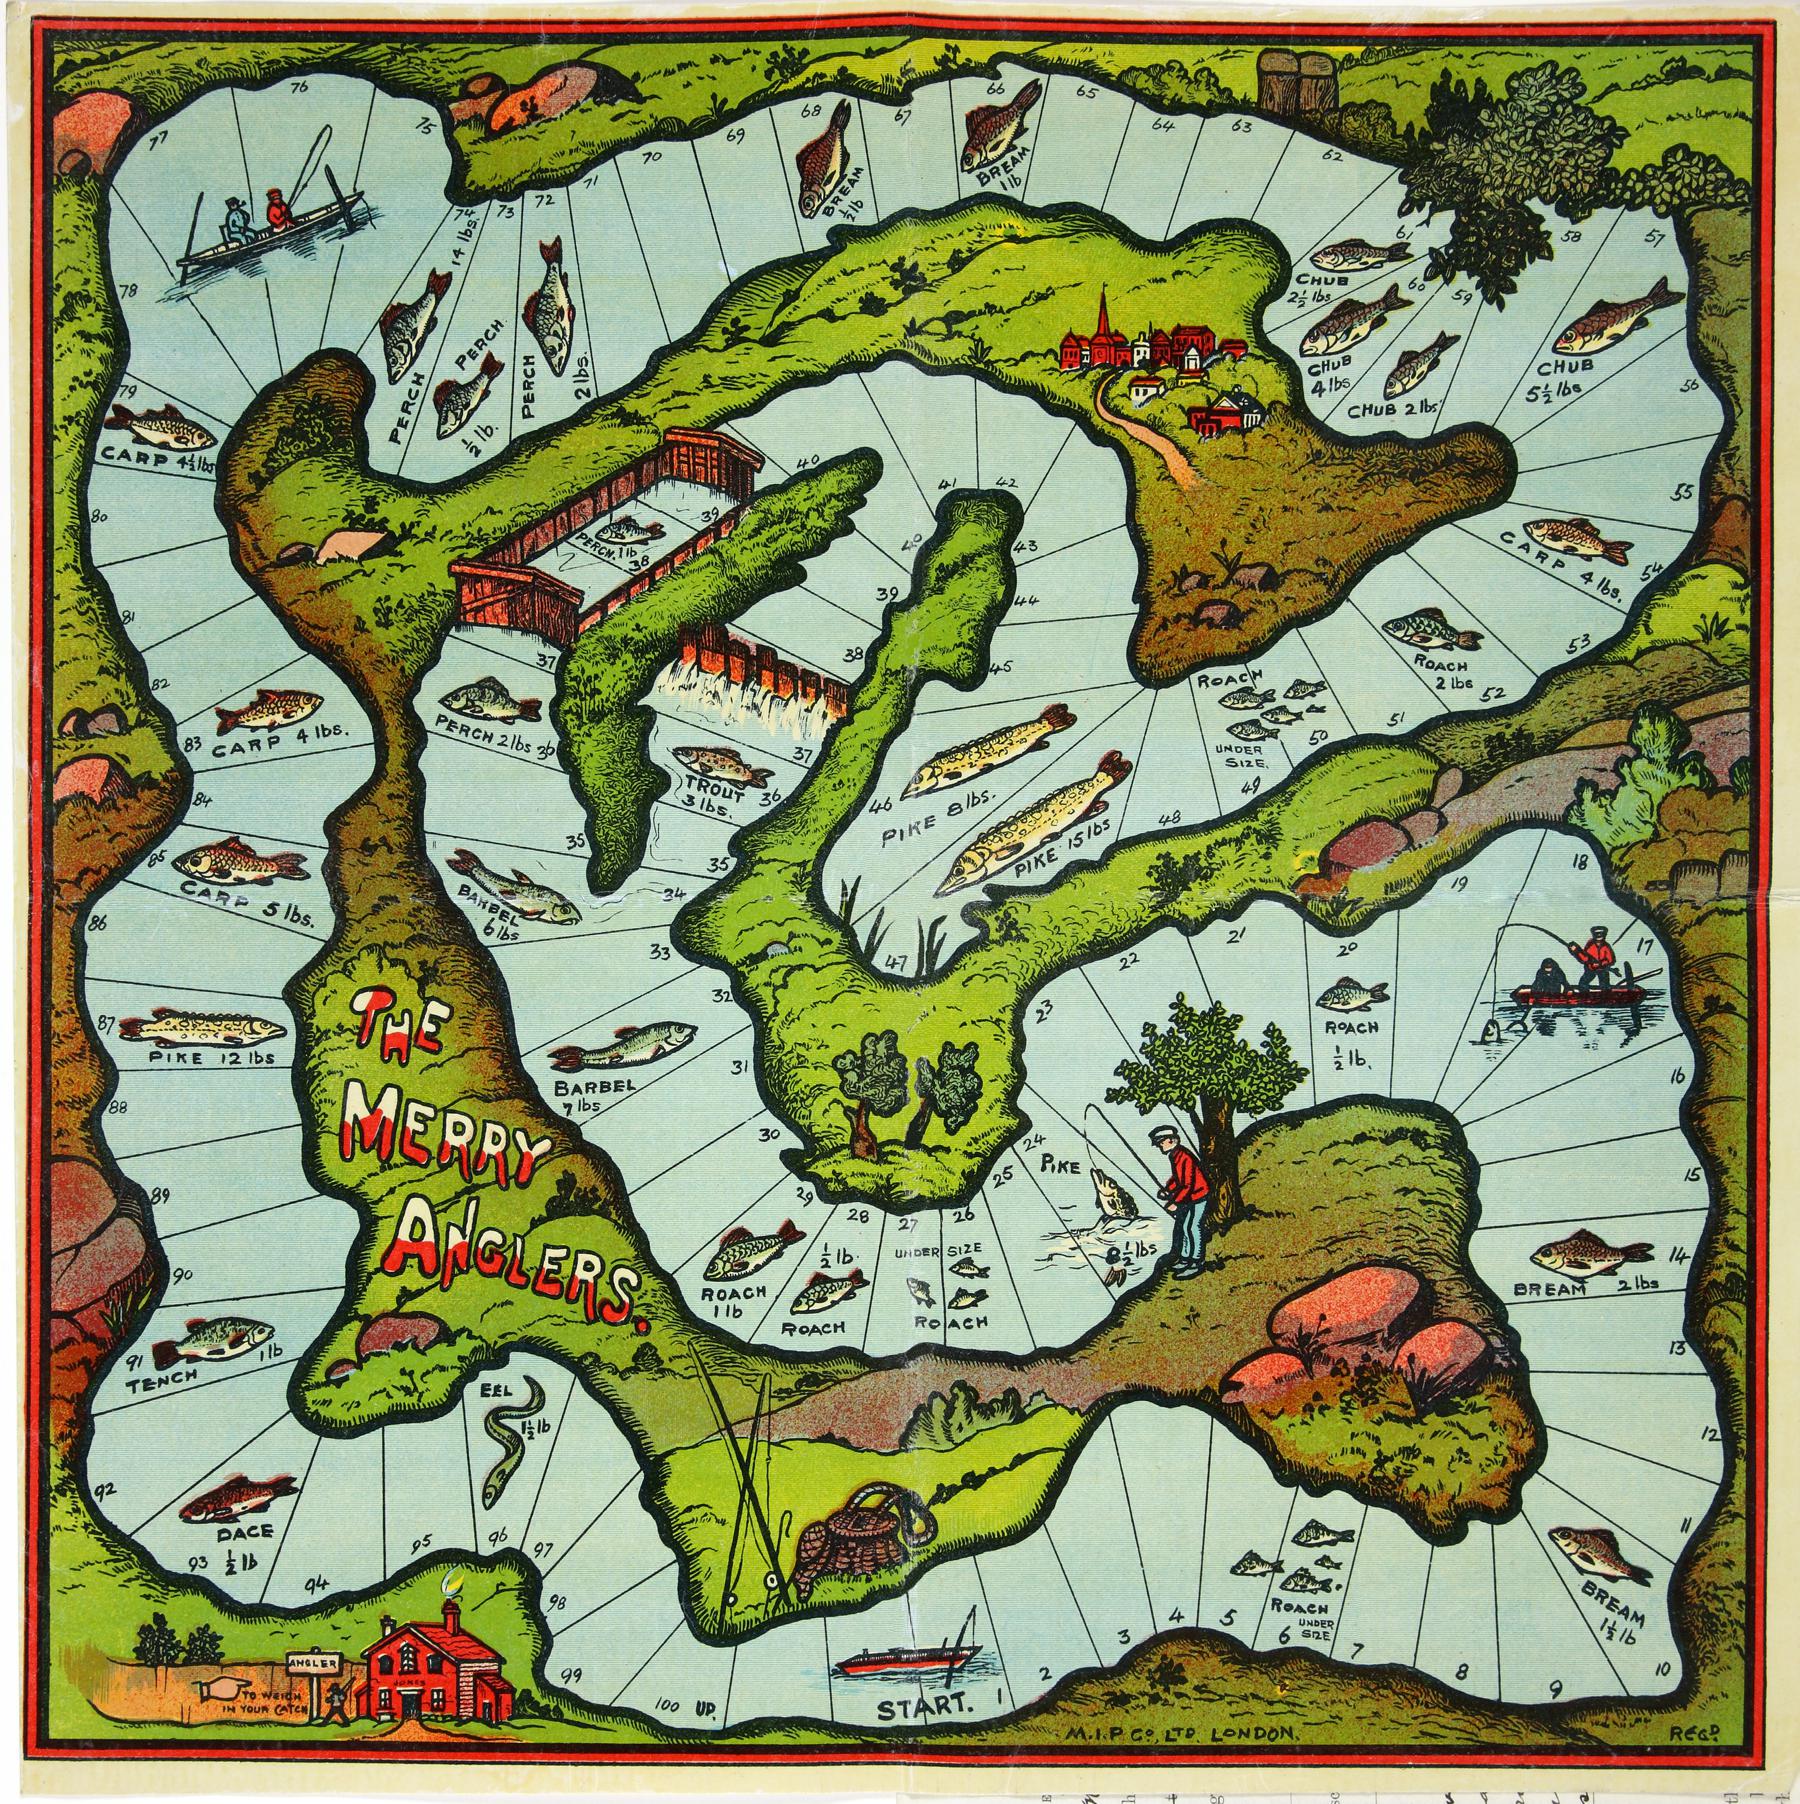 Board game in which a winding trail goes all around the board. It looks like a river and has images of different fish along the way.